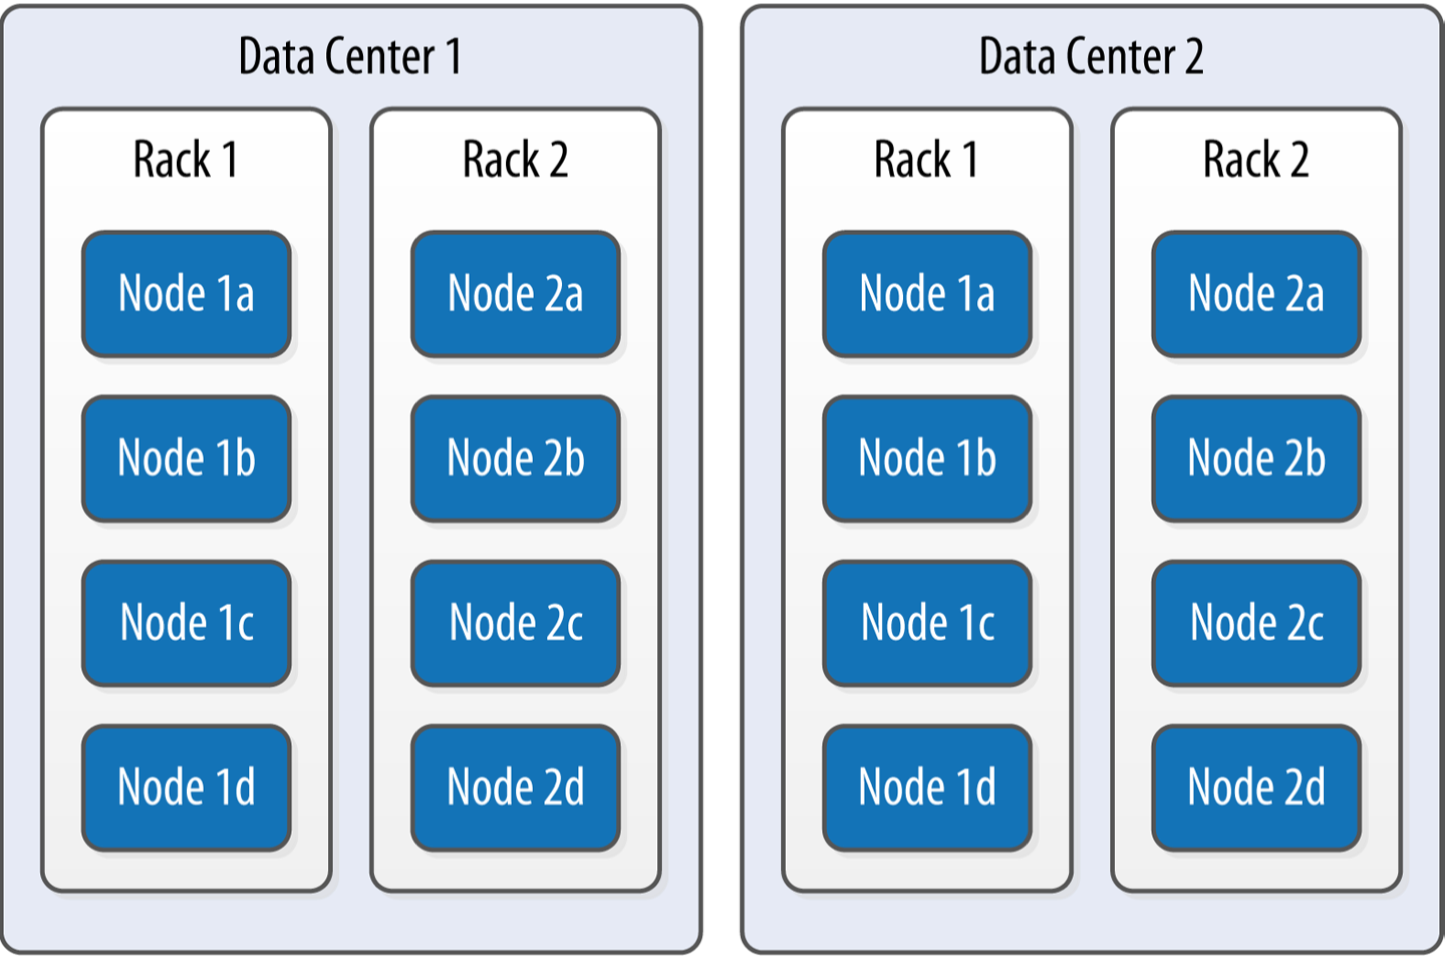 nodes, data centers and racks